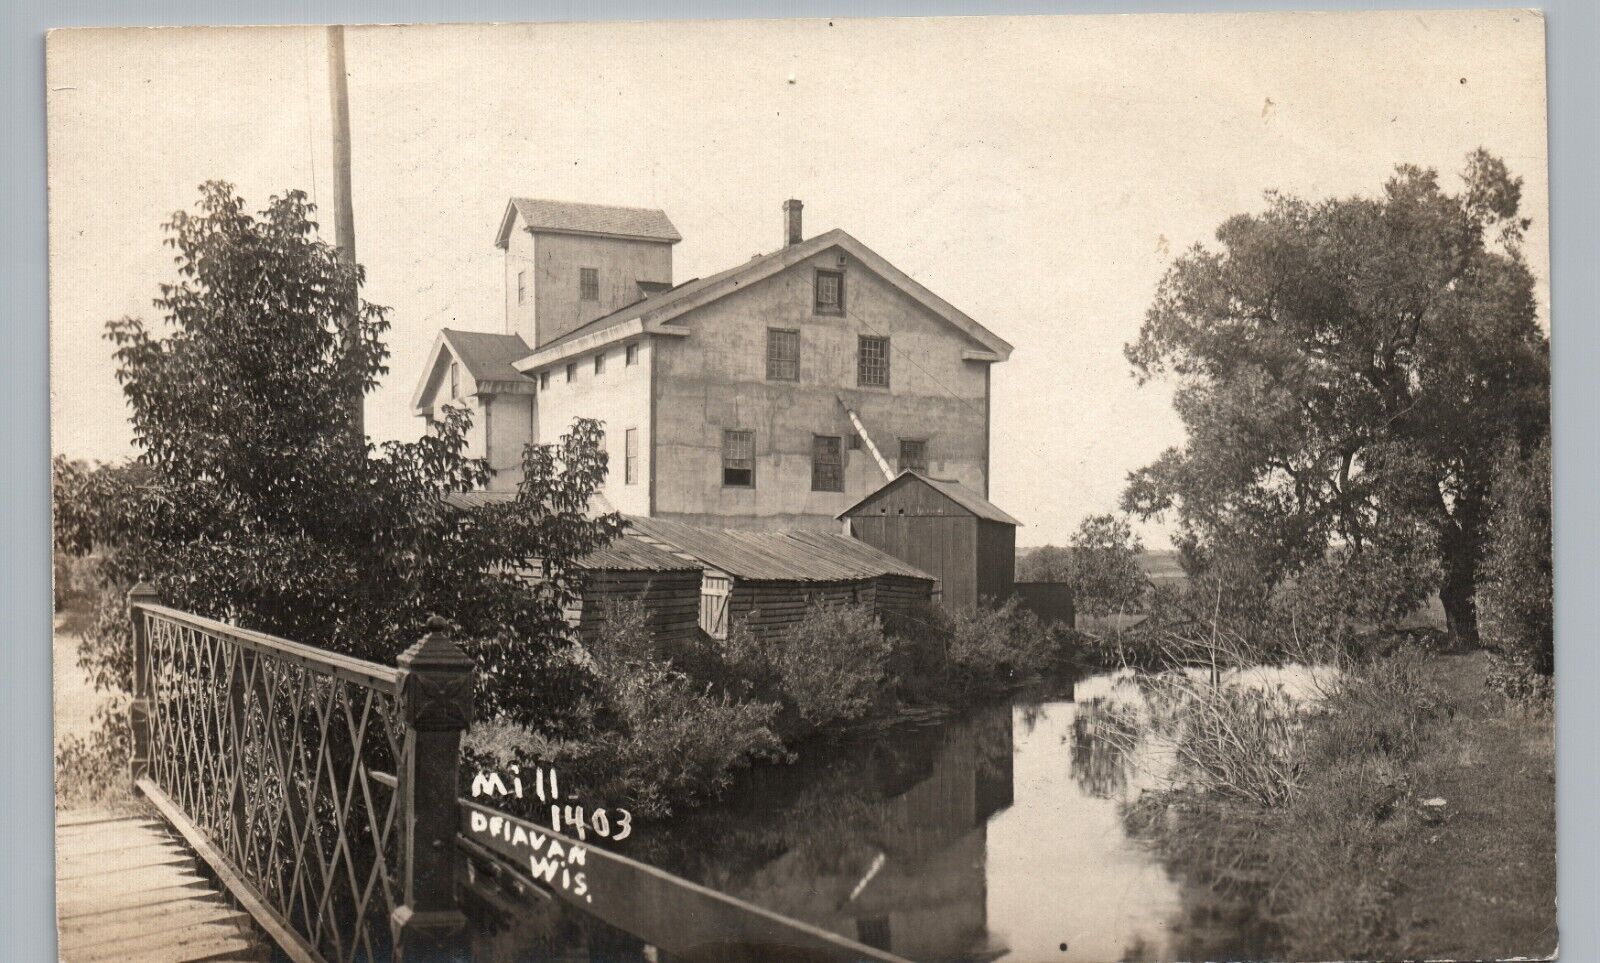 THE OLD MILL delavan wi real photo postcard rppc historic wisconsin industry